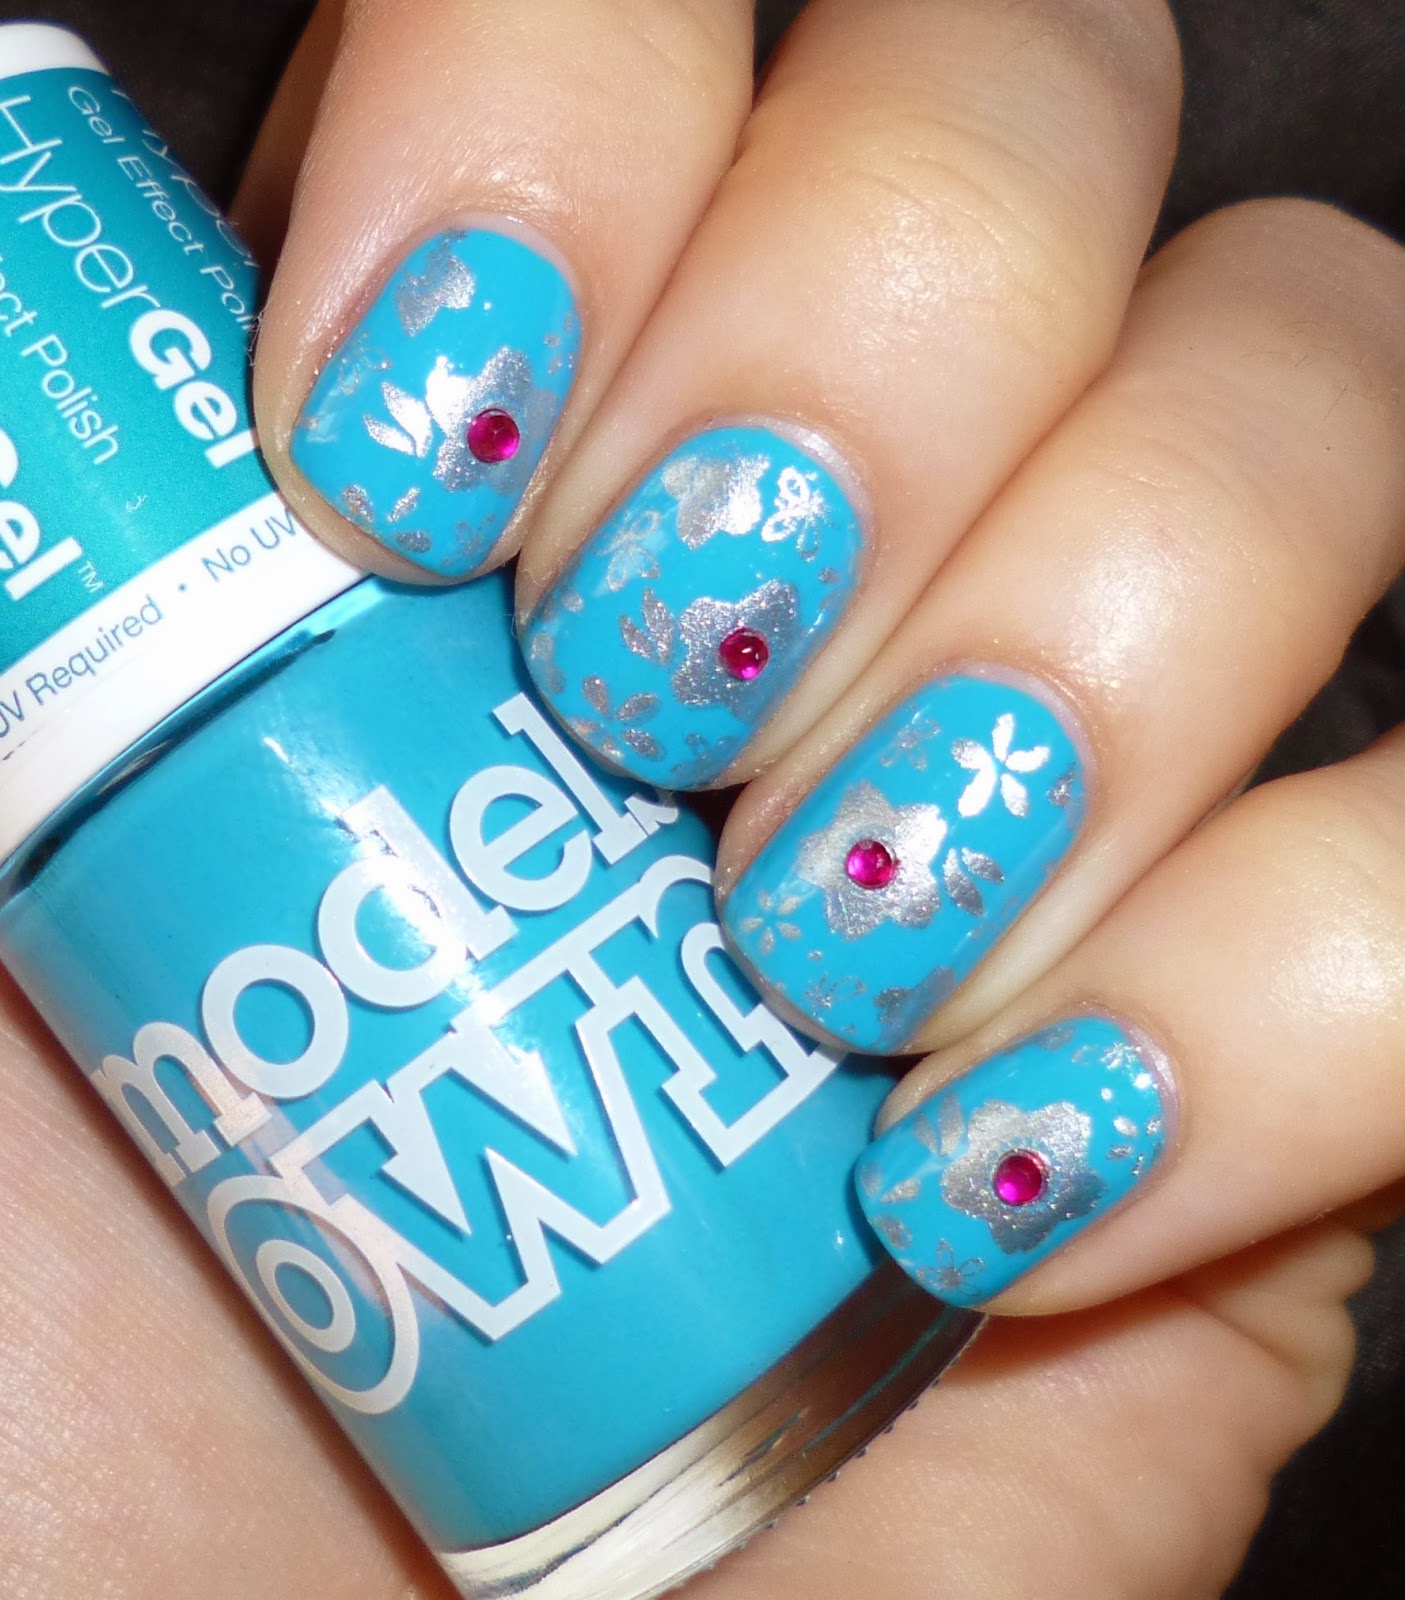 Lou is Perfectly Polished: Blue Glint and Flowers